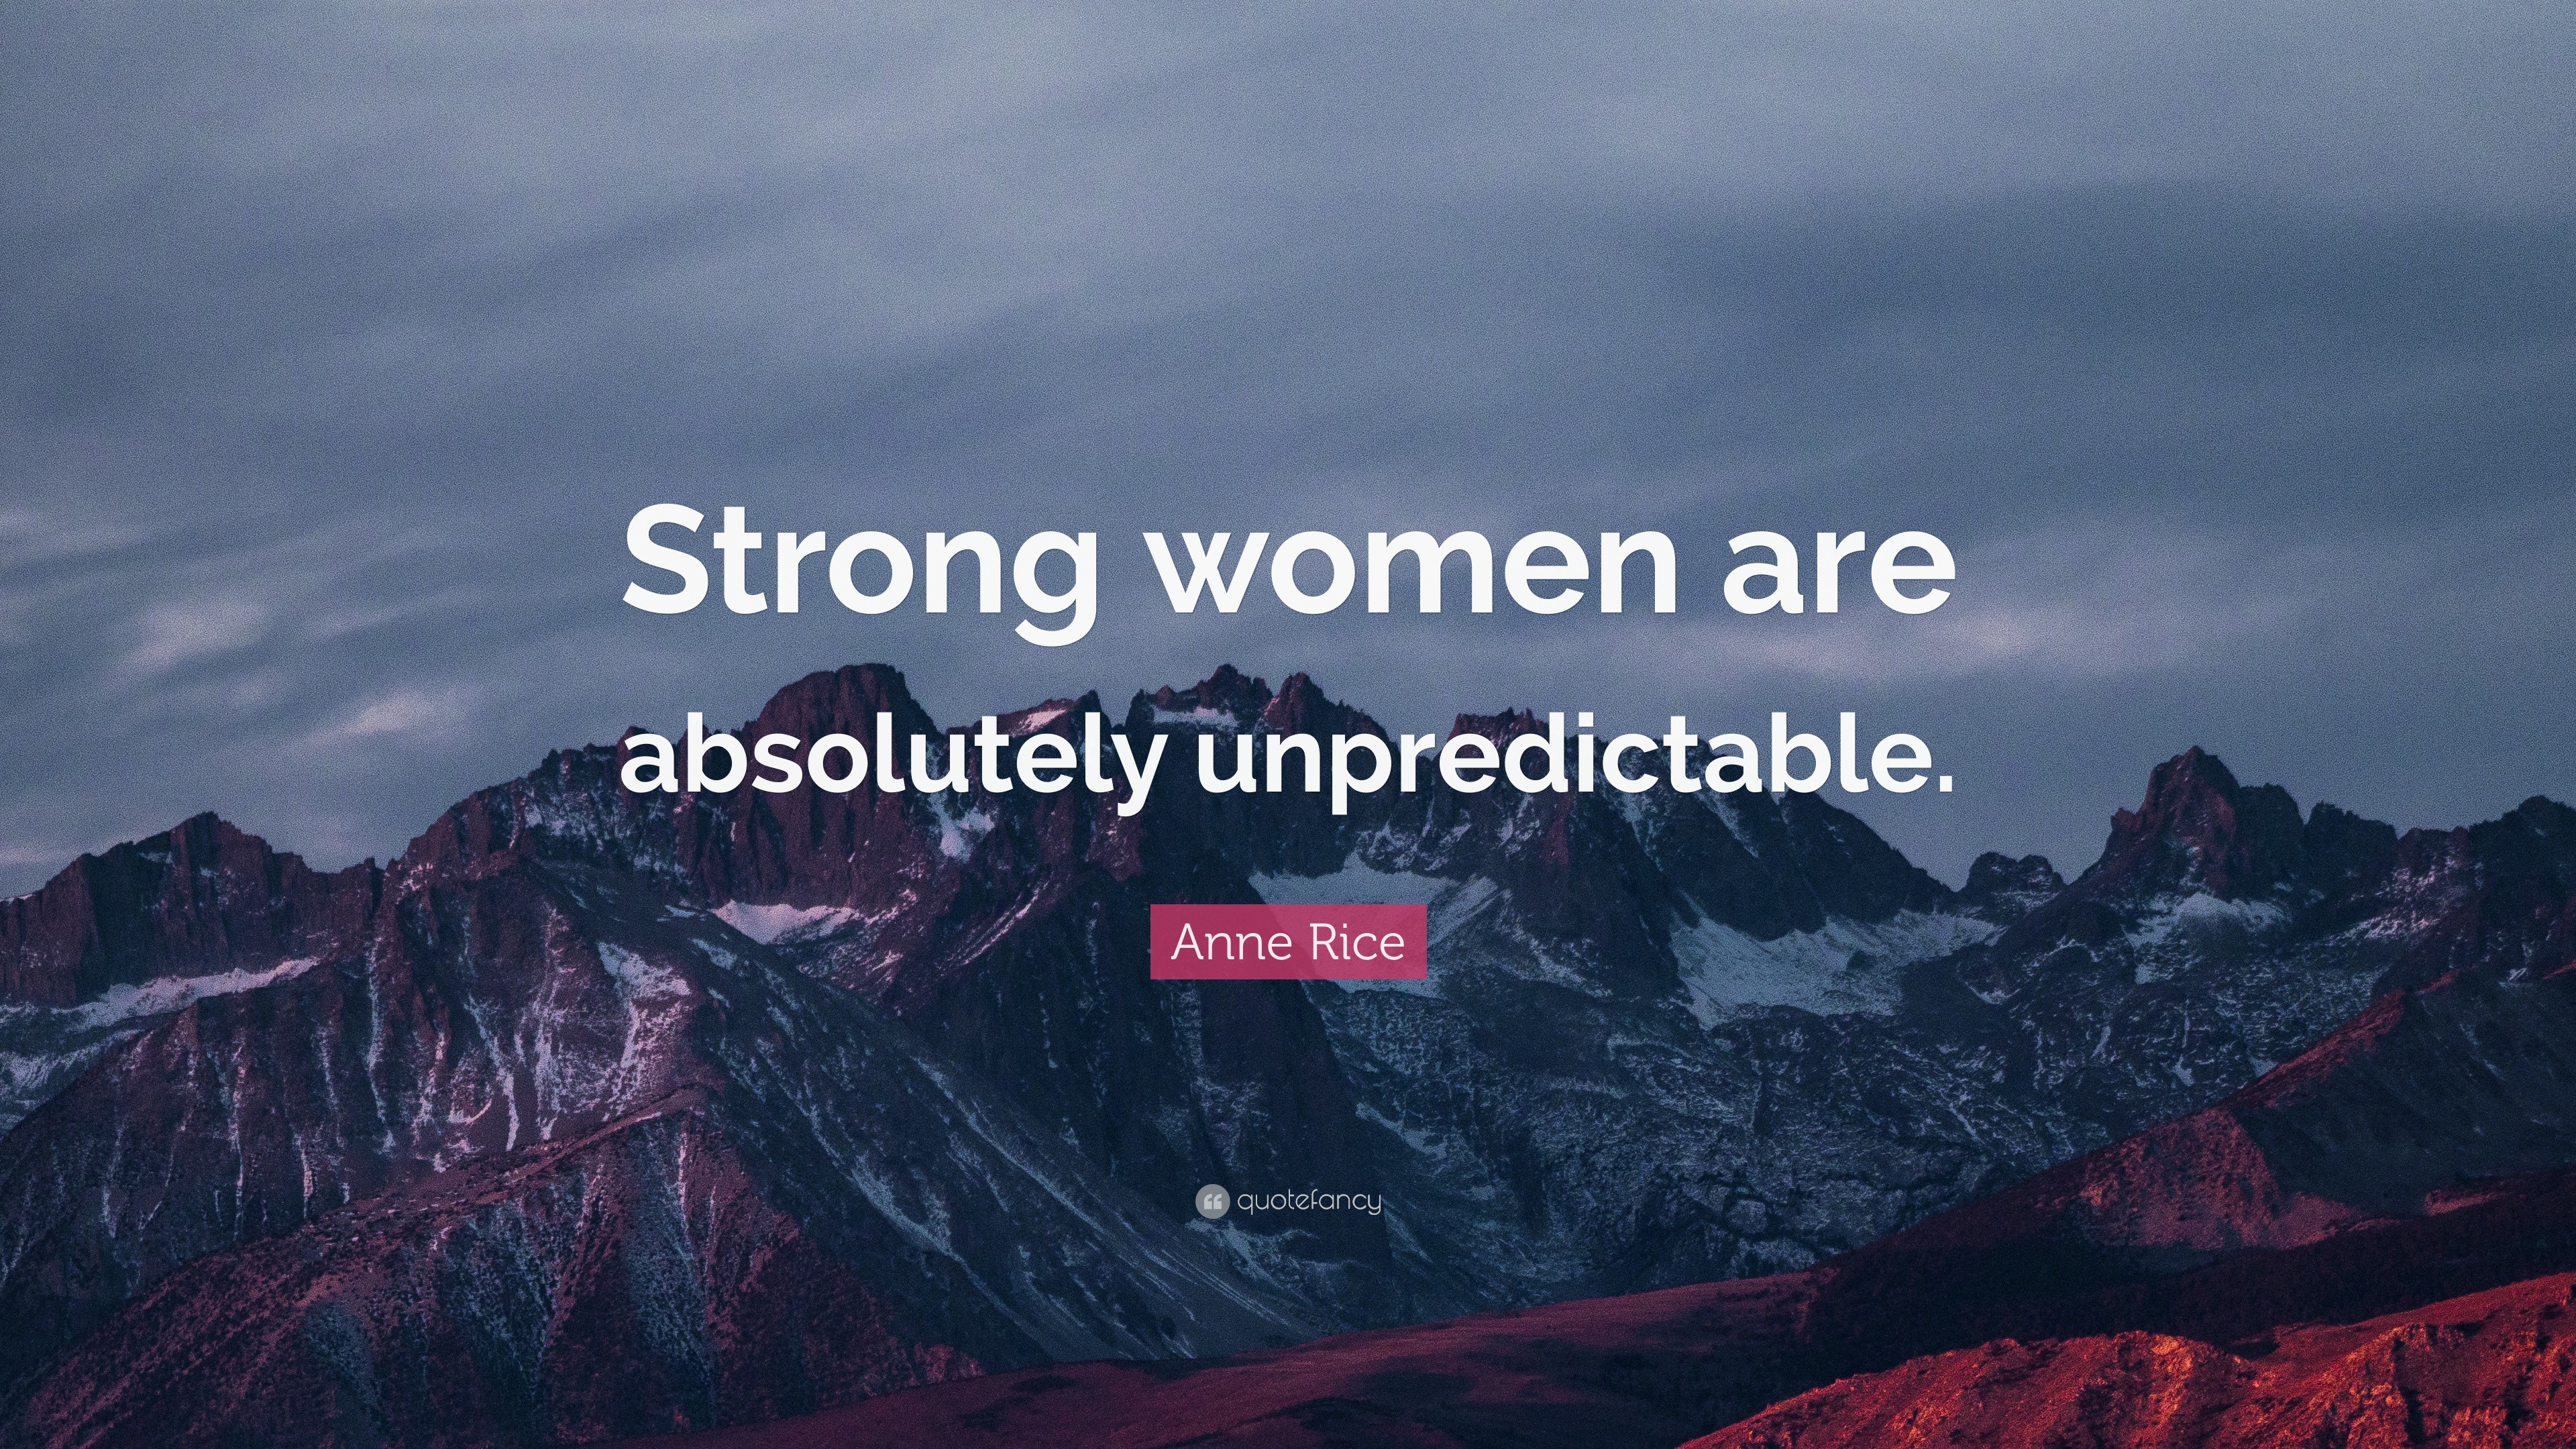 Anne Rice Quote: “Strong women are absolutely unpredictable.”